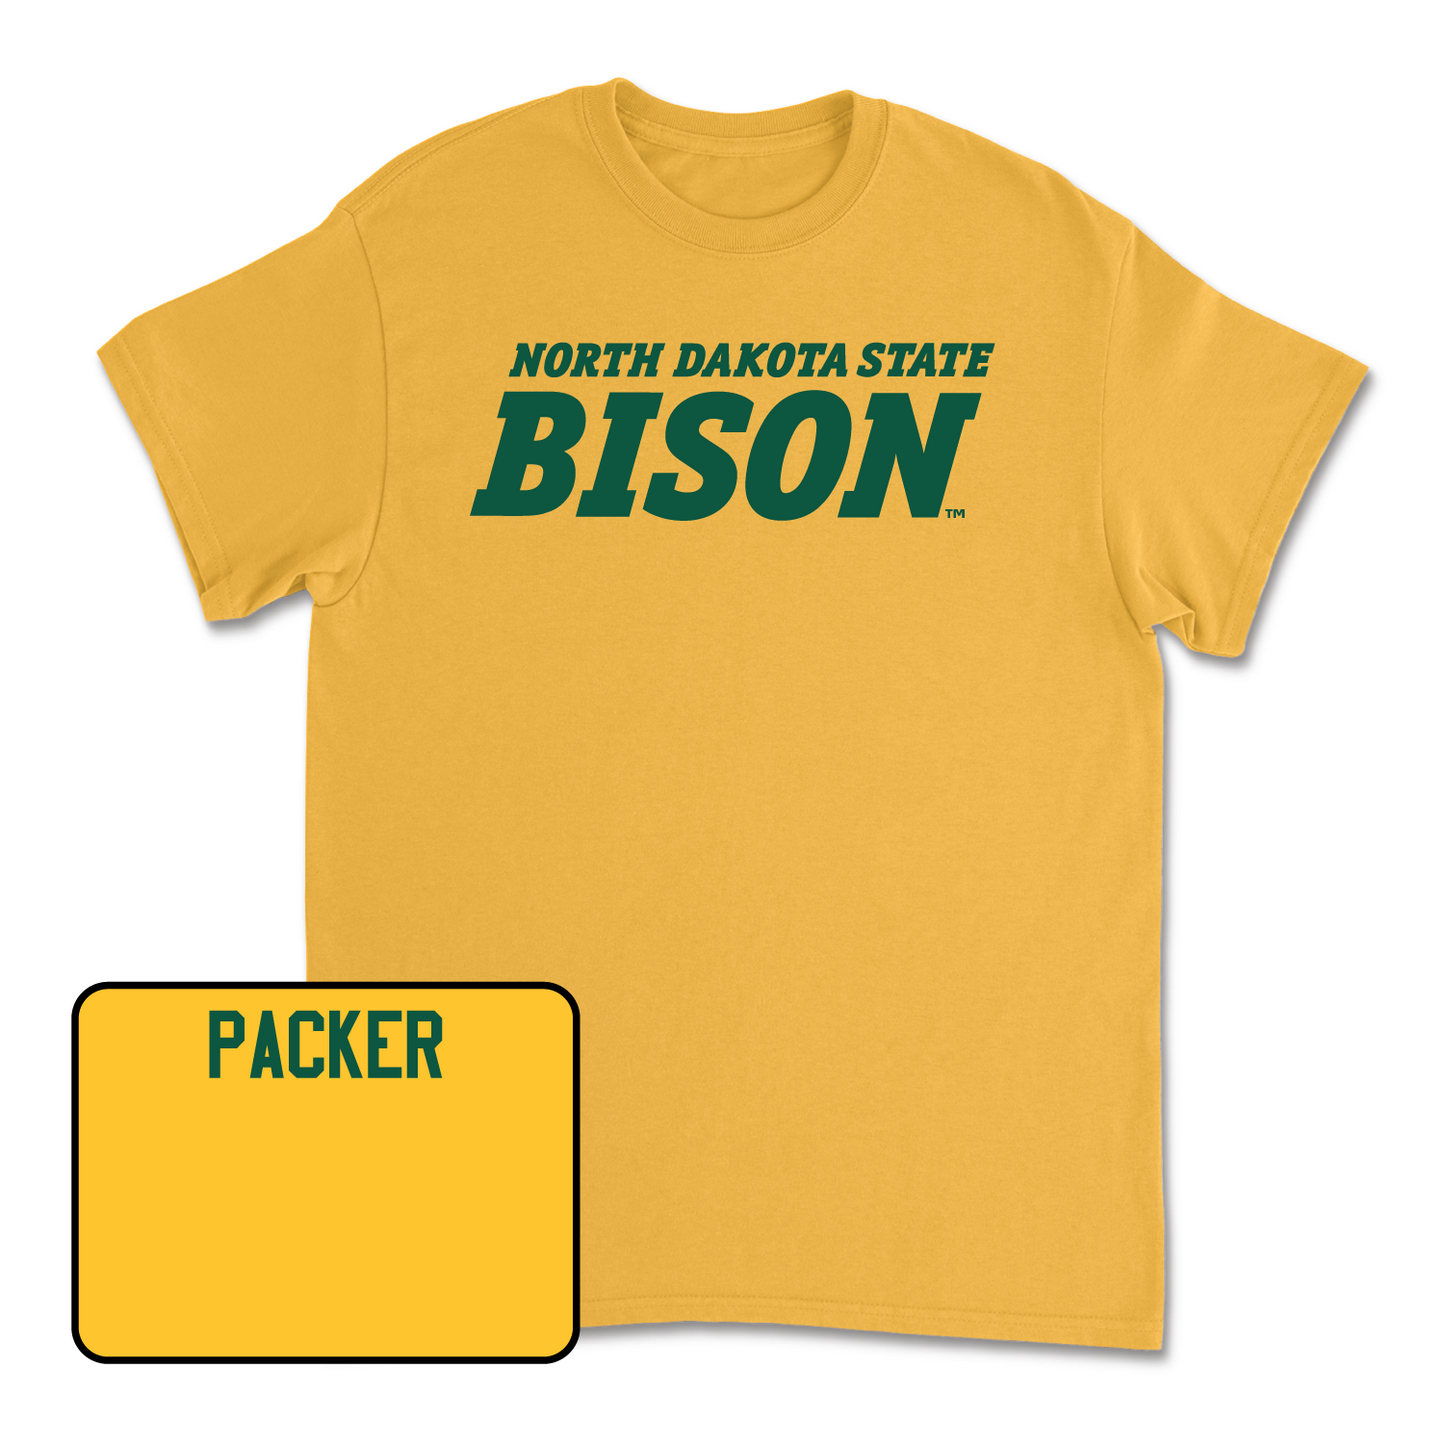 Gold Track & Field Bison Tee Small / Jack Packer